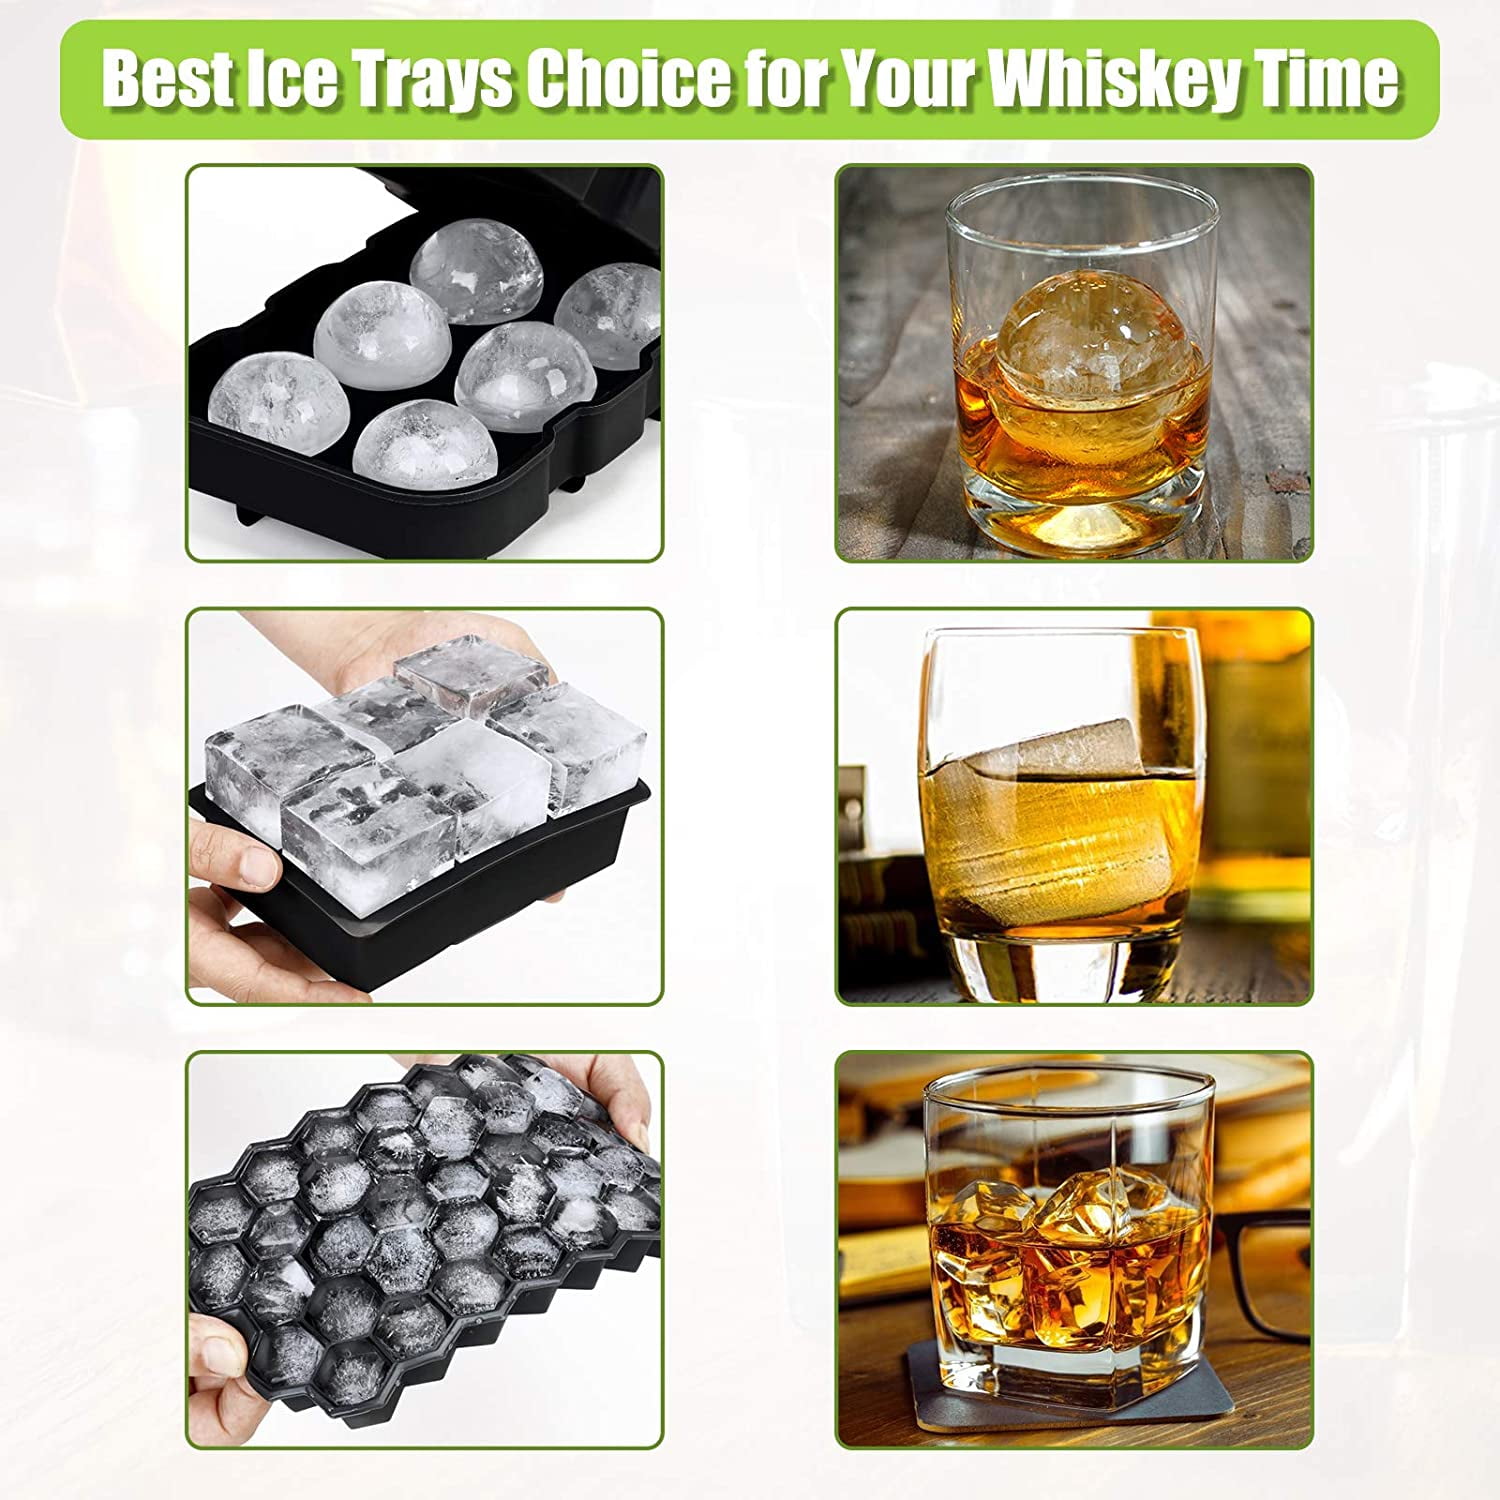 Silicone Whiskey Ice Ball Maker - AIGP5676 - IdeaStage Promotional